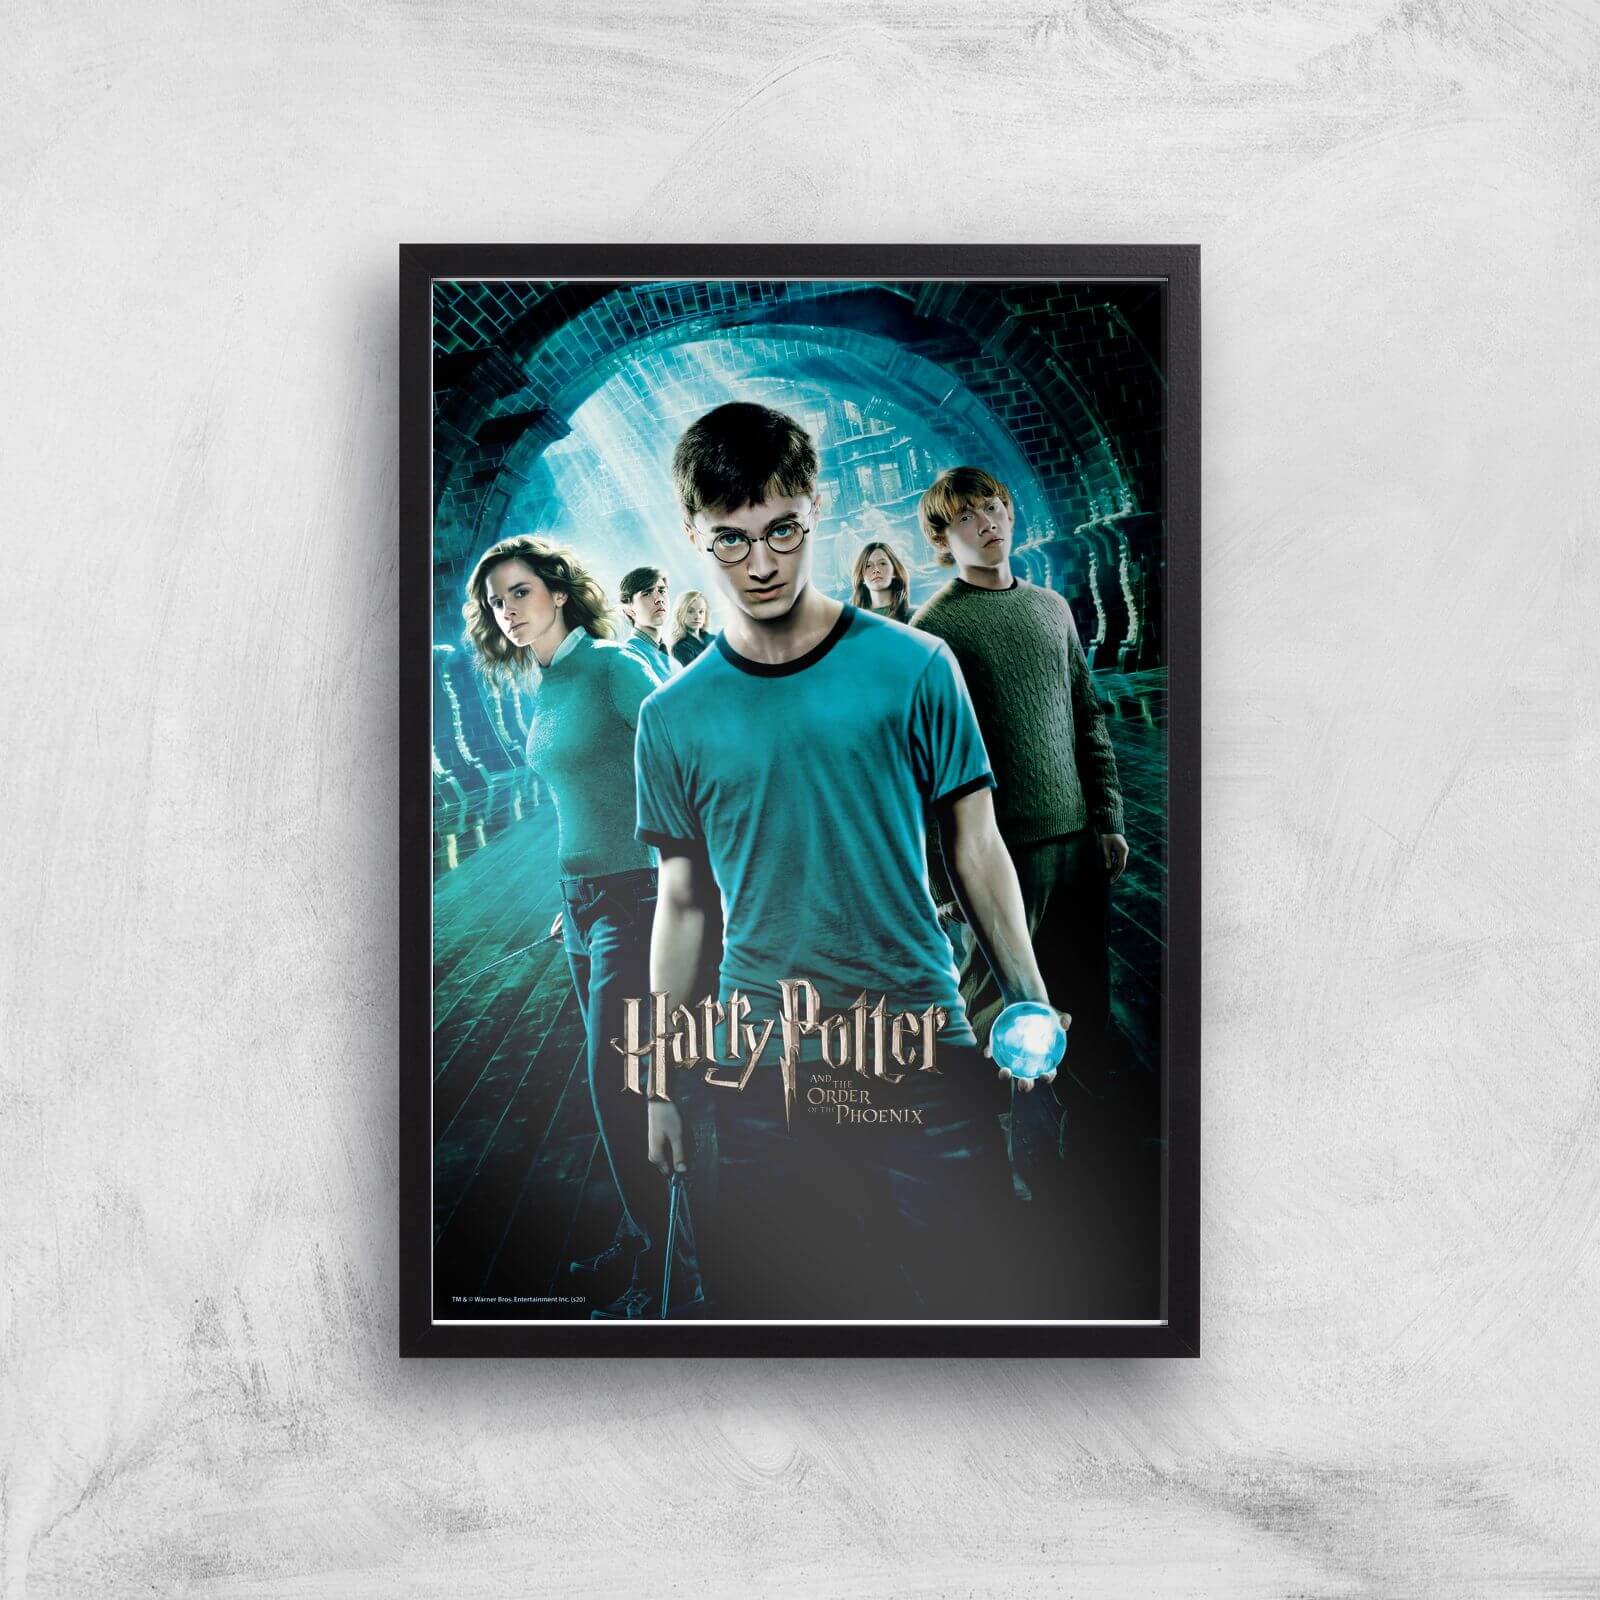 Harry Potter and the Order Of The Phoenix Giclee Art Print - A2 - Black Frame